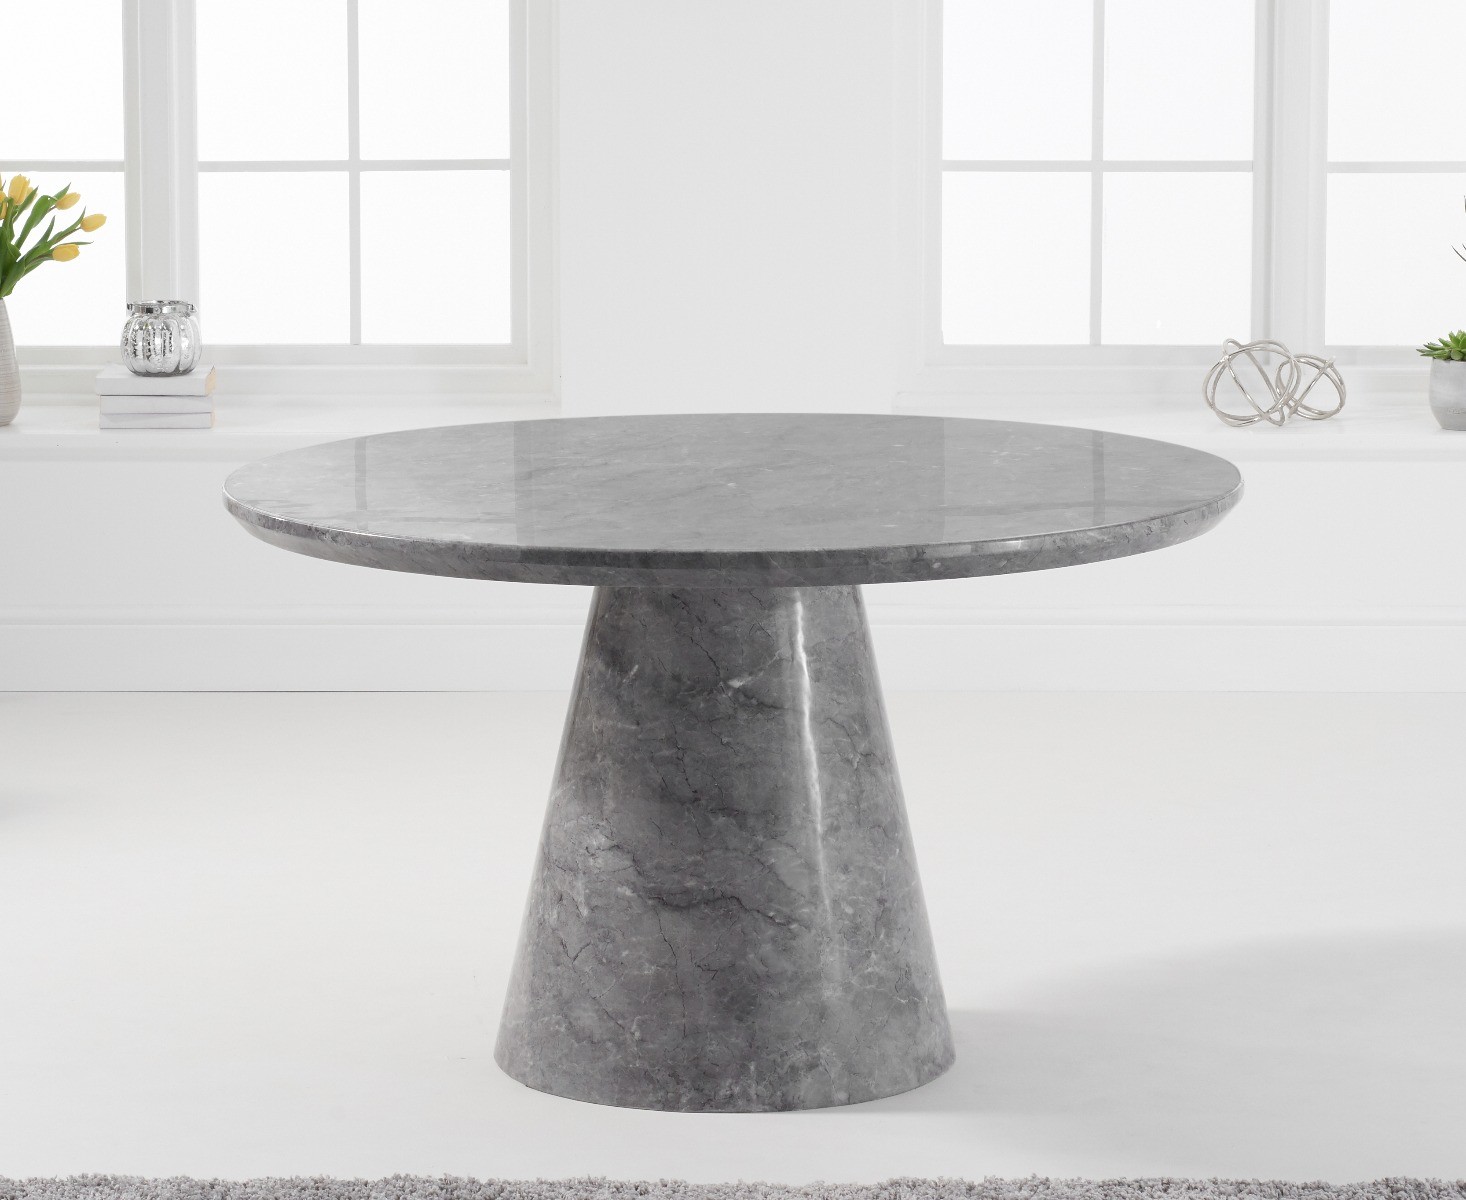 Photo 1 of Ravello 130cm round grey marble dining table with 4 black aldo chairs